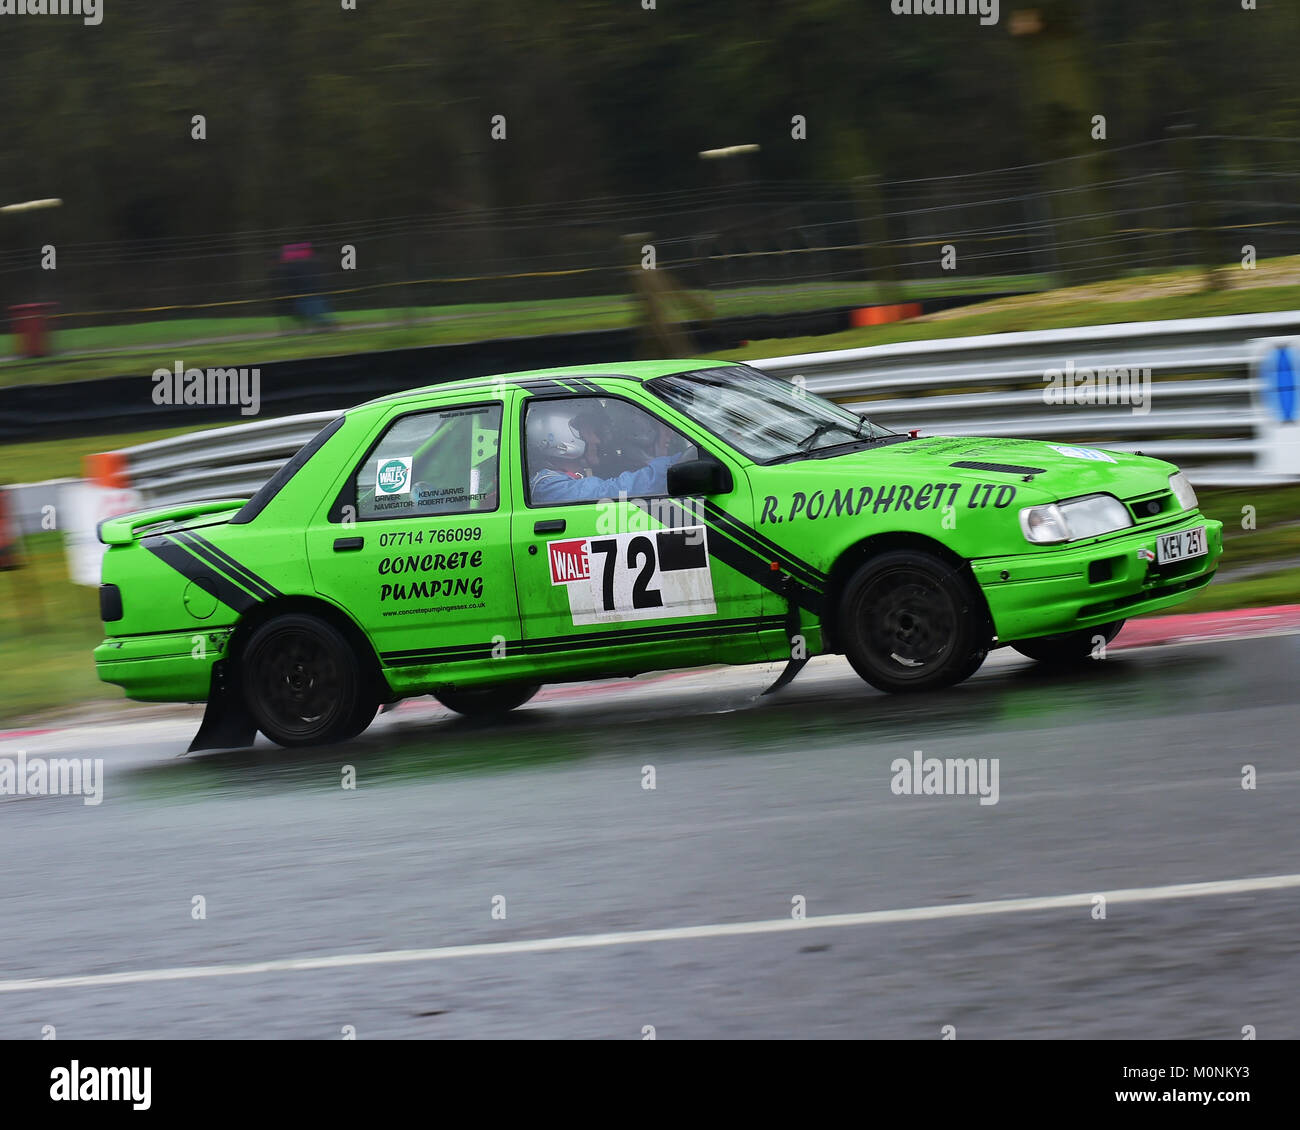 Kevin Jarvis, Robert Pomphrett, Ford Sierra RS Cosworth, MGJ Rally Stages, Chelmsford Motor Club, Brands Hatch,  Saturday, 20th January 2018, MSV, Cir Stock Photo